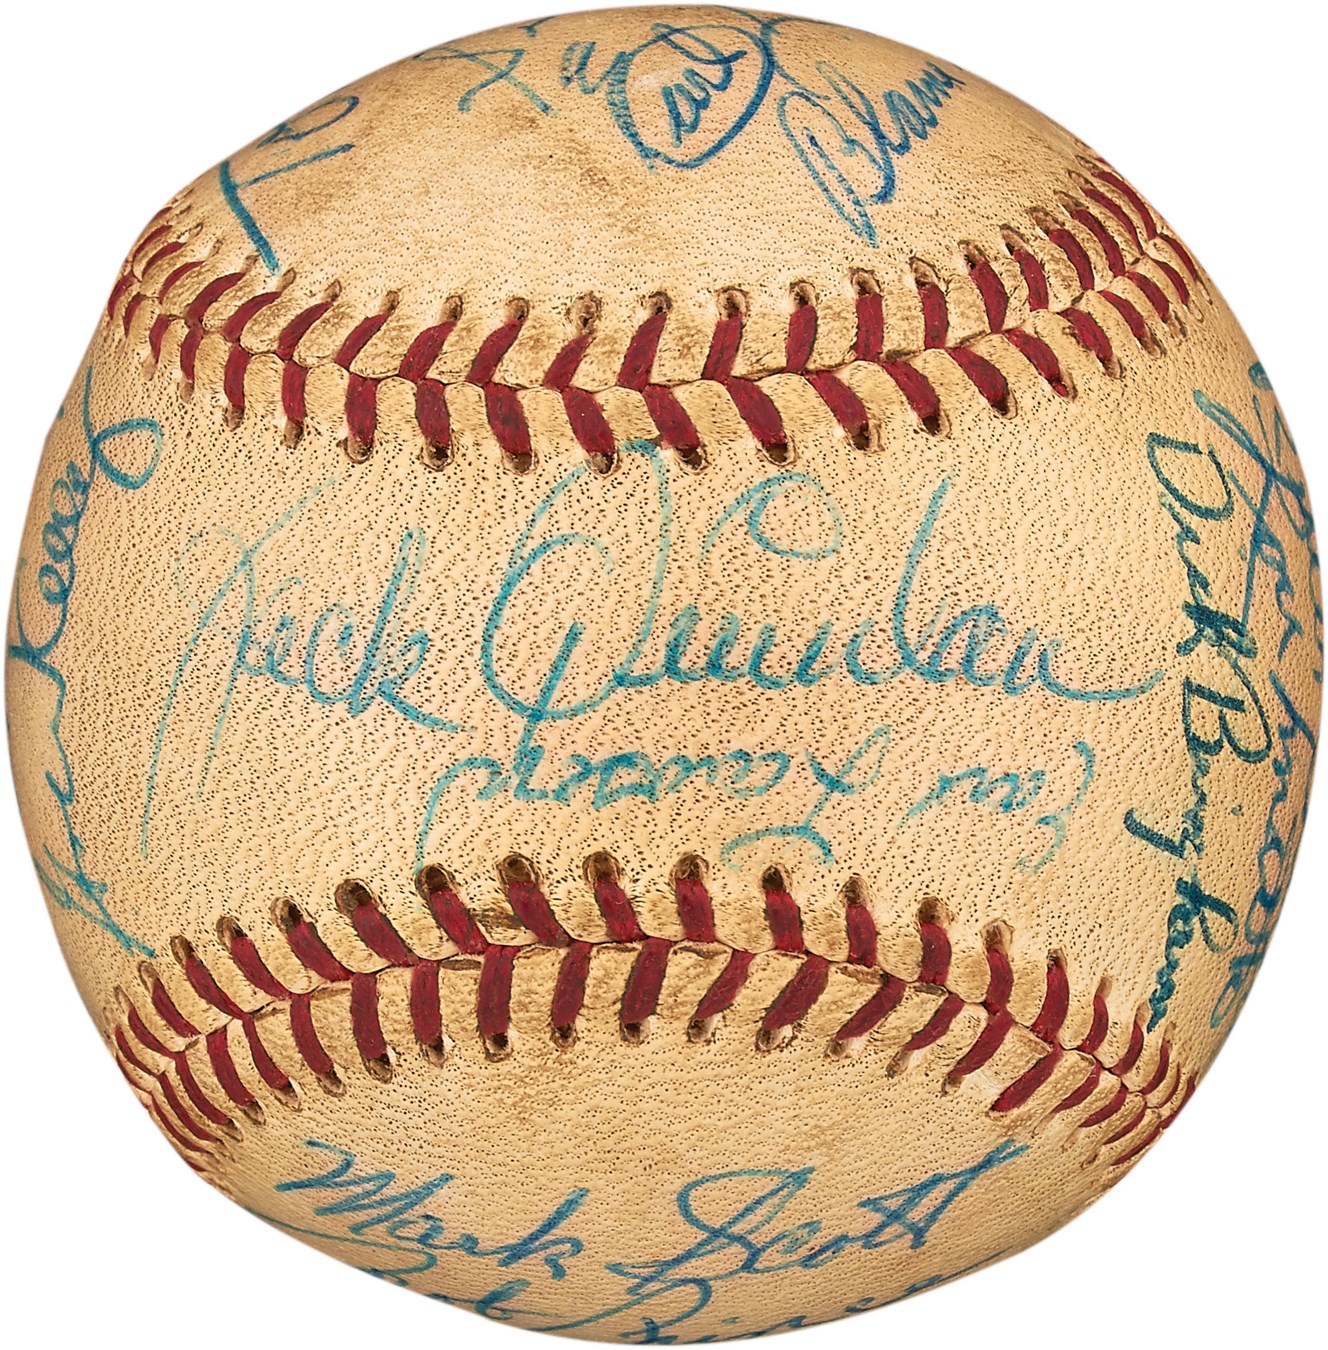 Baseball Autographs - 1950s Sportscasters and Sportswriters Signed Baseball